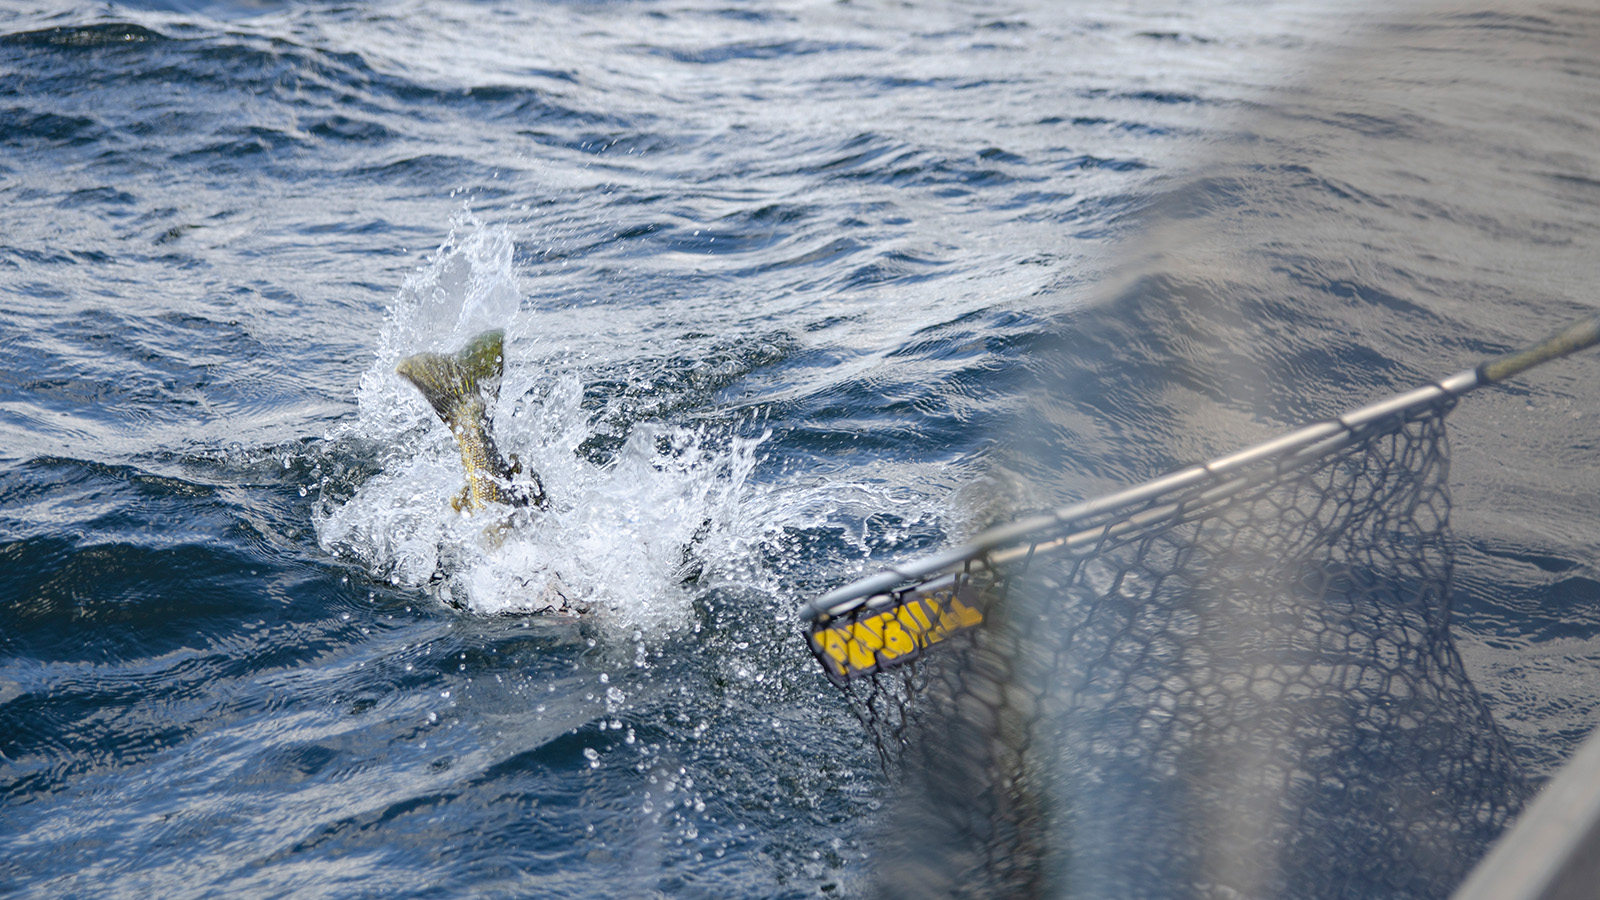 Fish being landed using a net